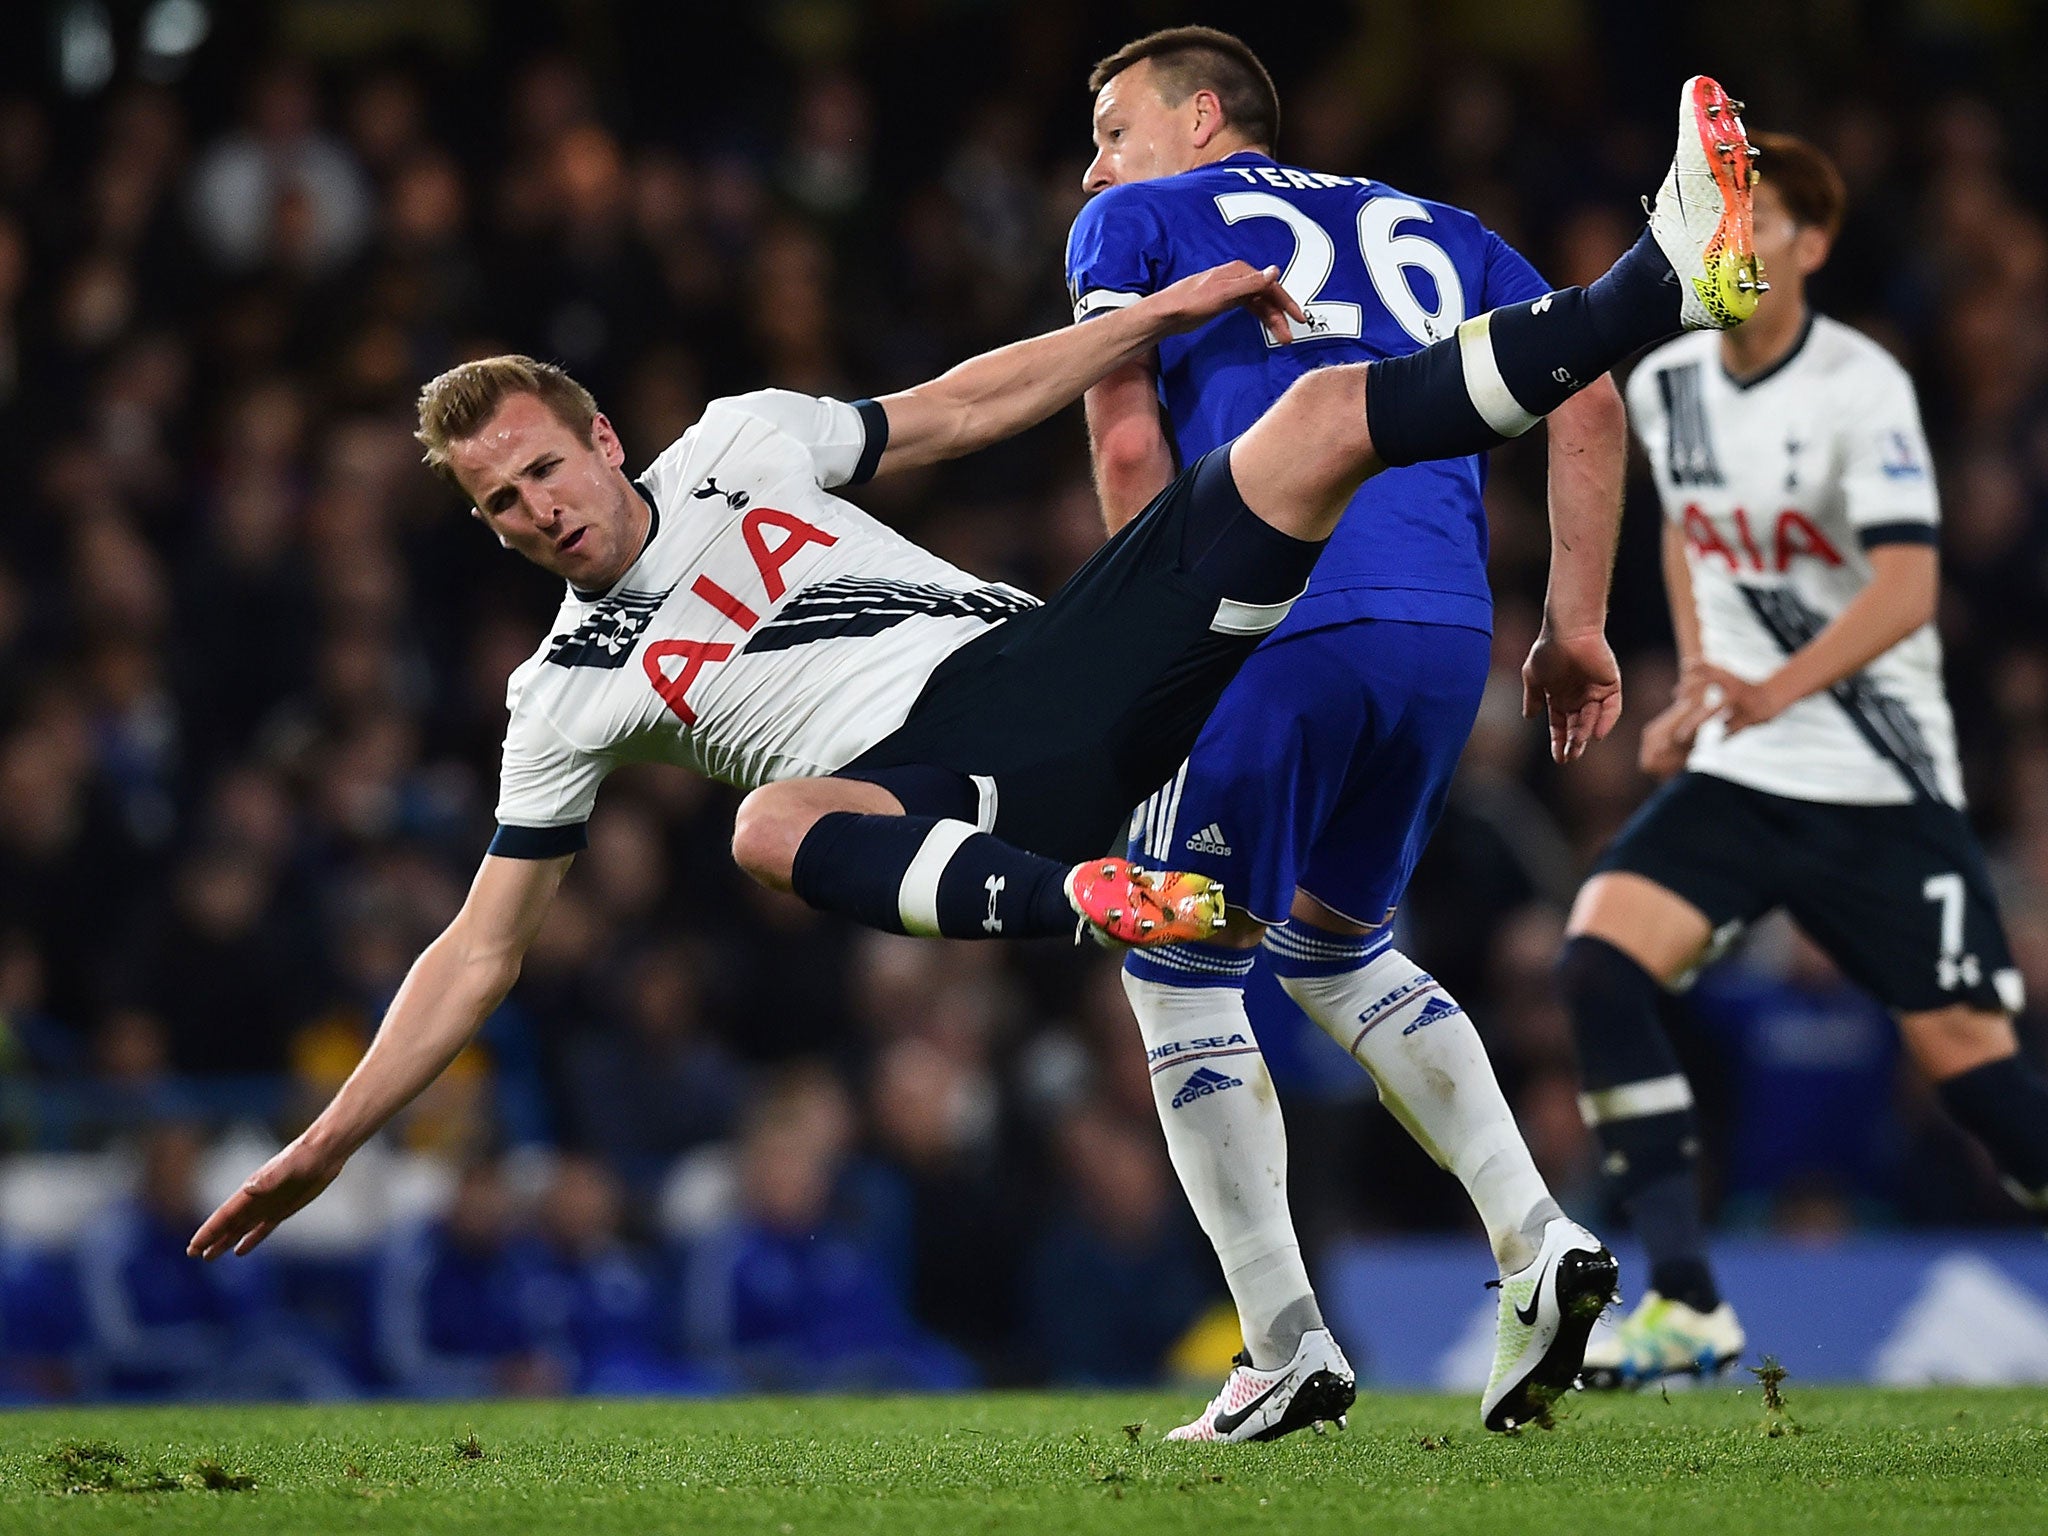 Chelsea's bad-tempered draw with Tottenham epitomised the competitiveness of the Premier League